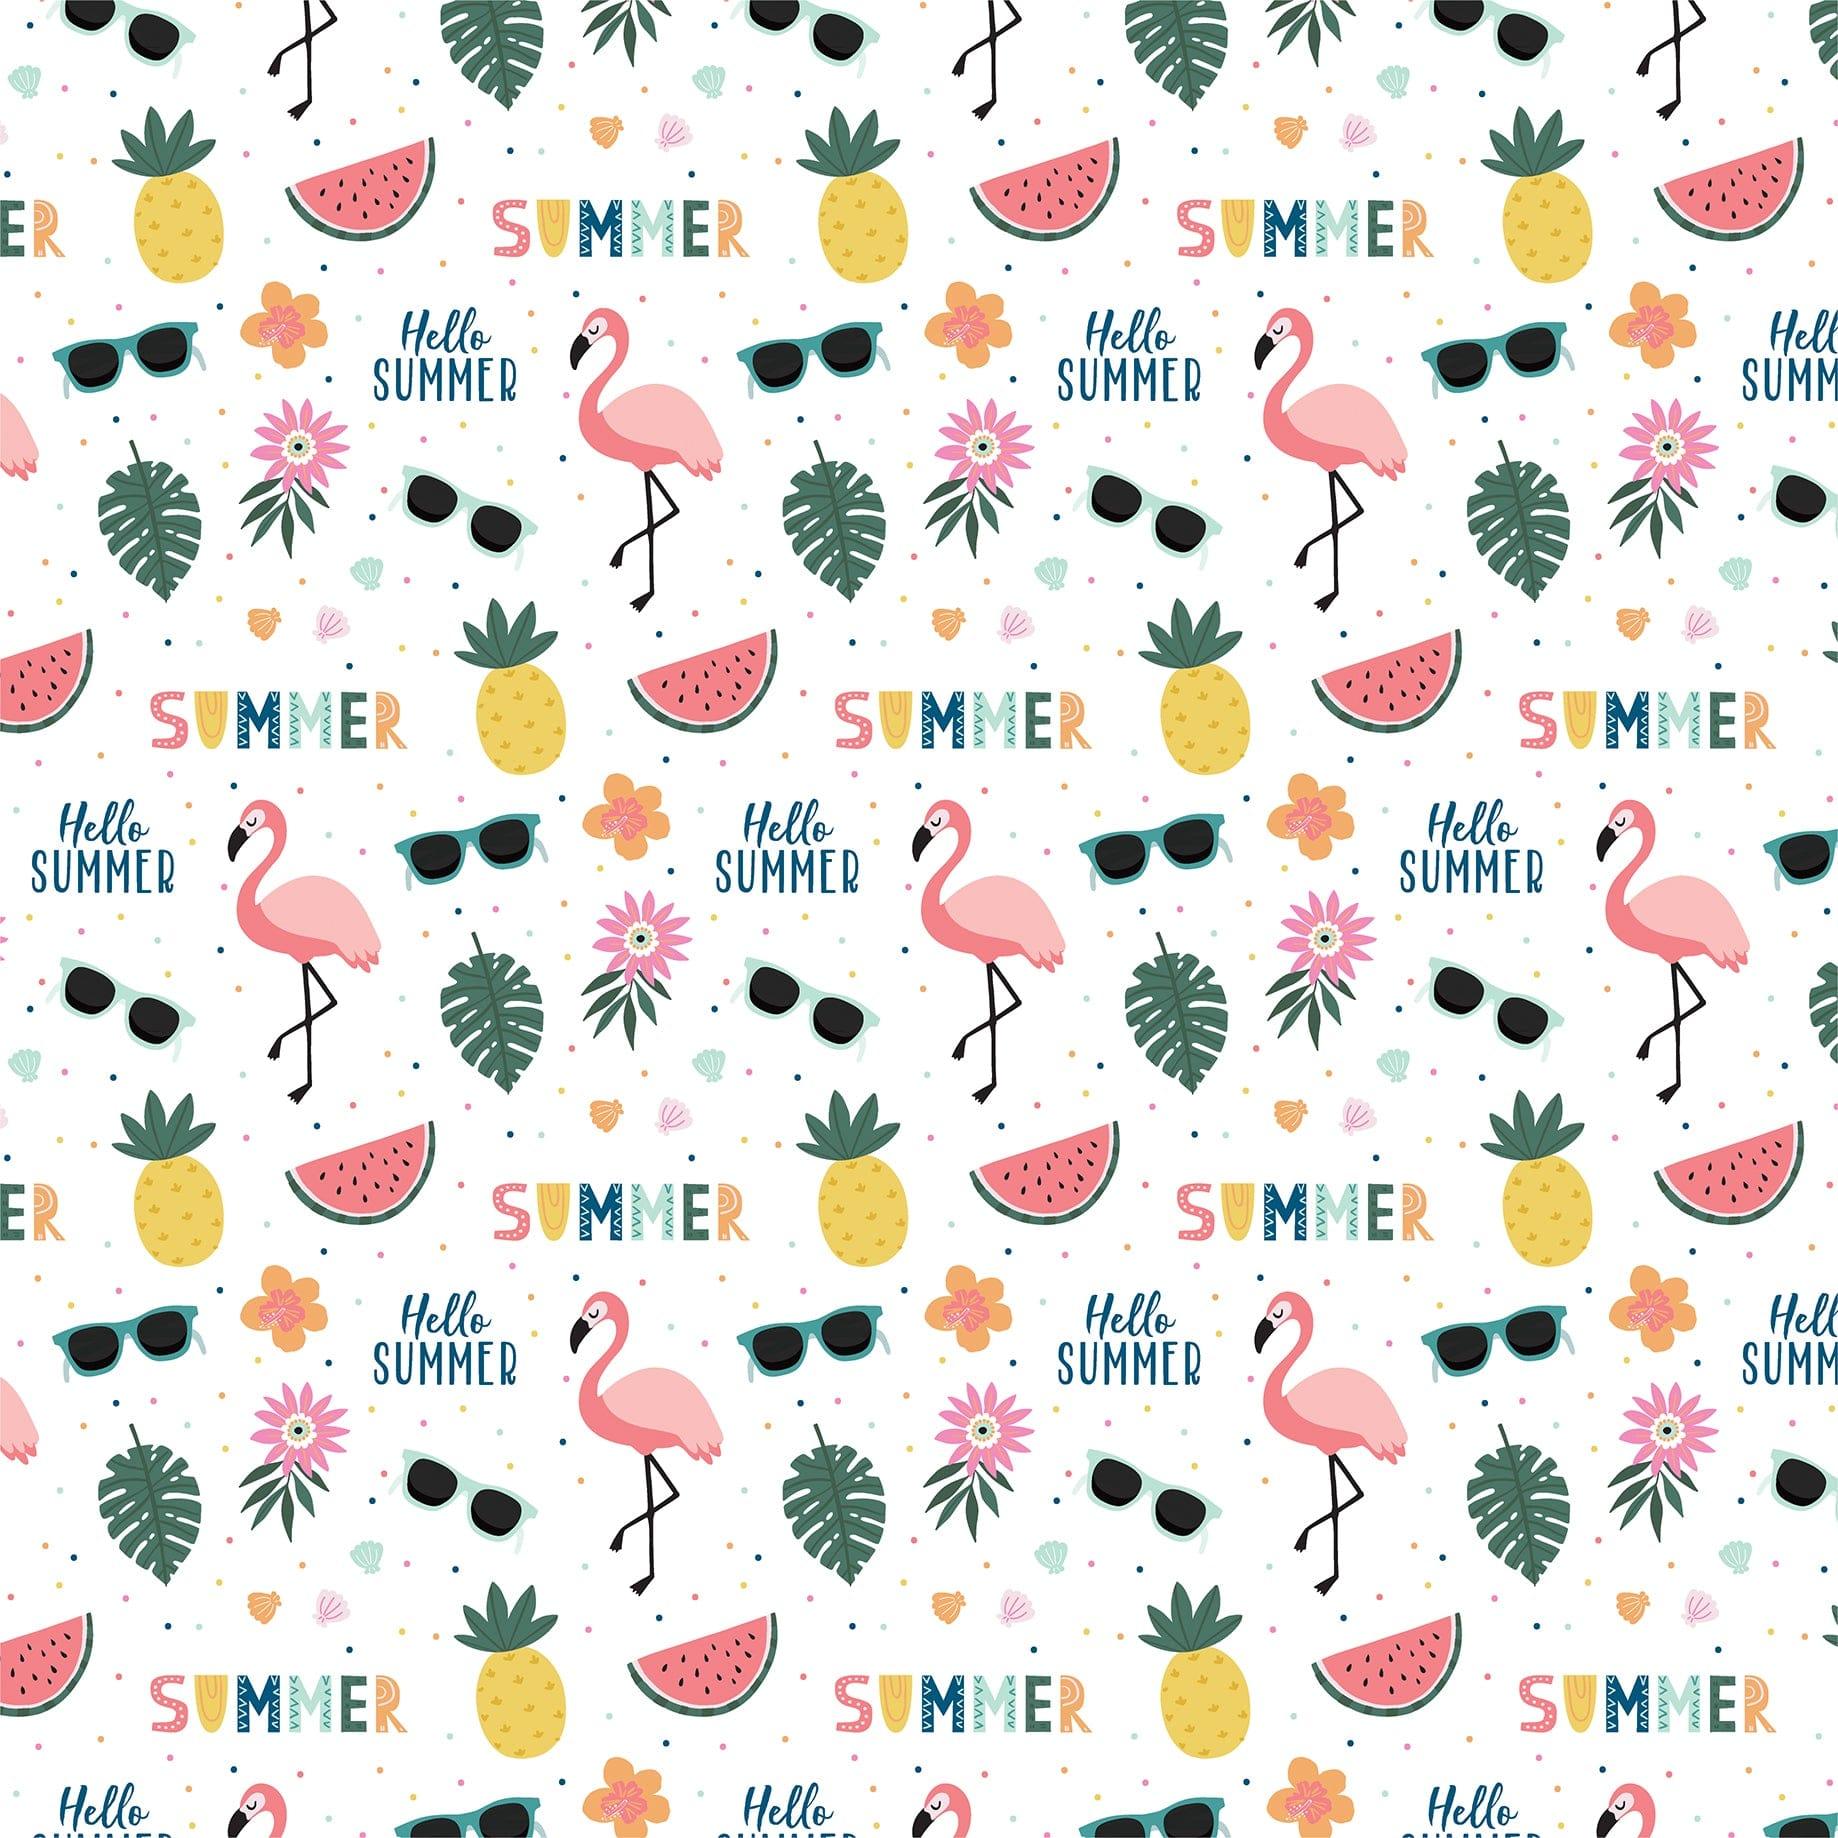 Pool Party Collection Hello Summer 12 x 12 Double-Sided Scrapbook Paper by Echo Park Paper - Scrapbook Supply Companies